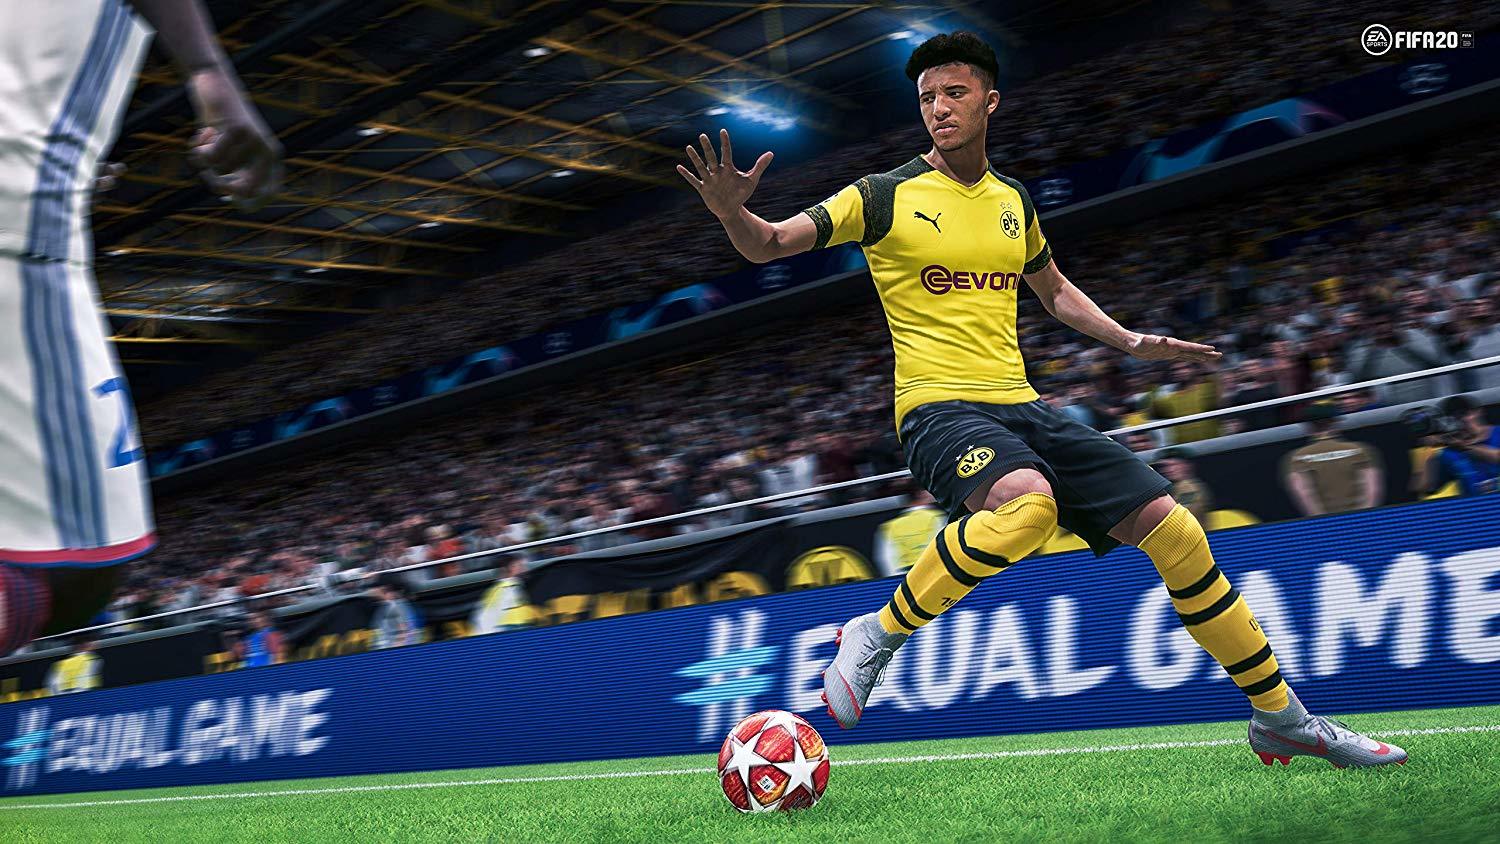 FIFA 20 Update Patch 1.18 Now Out On PS4 And Xbox One